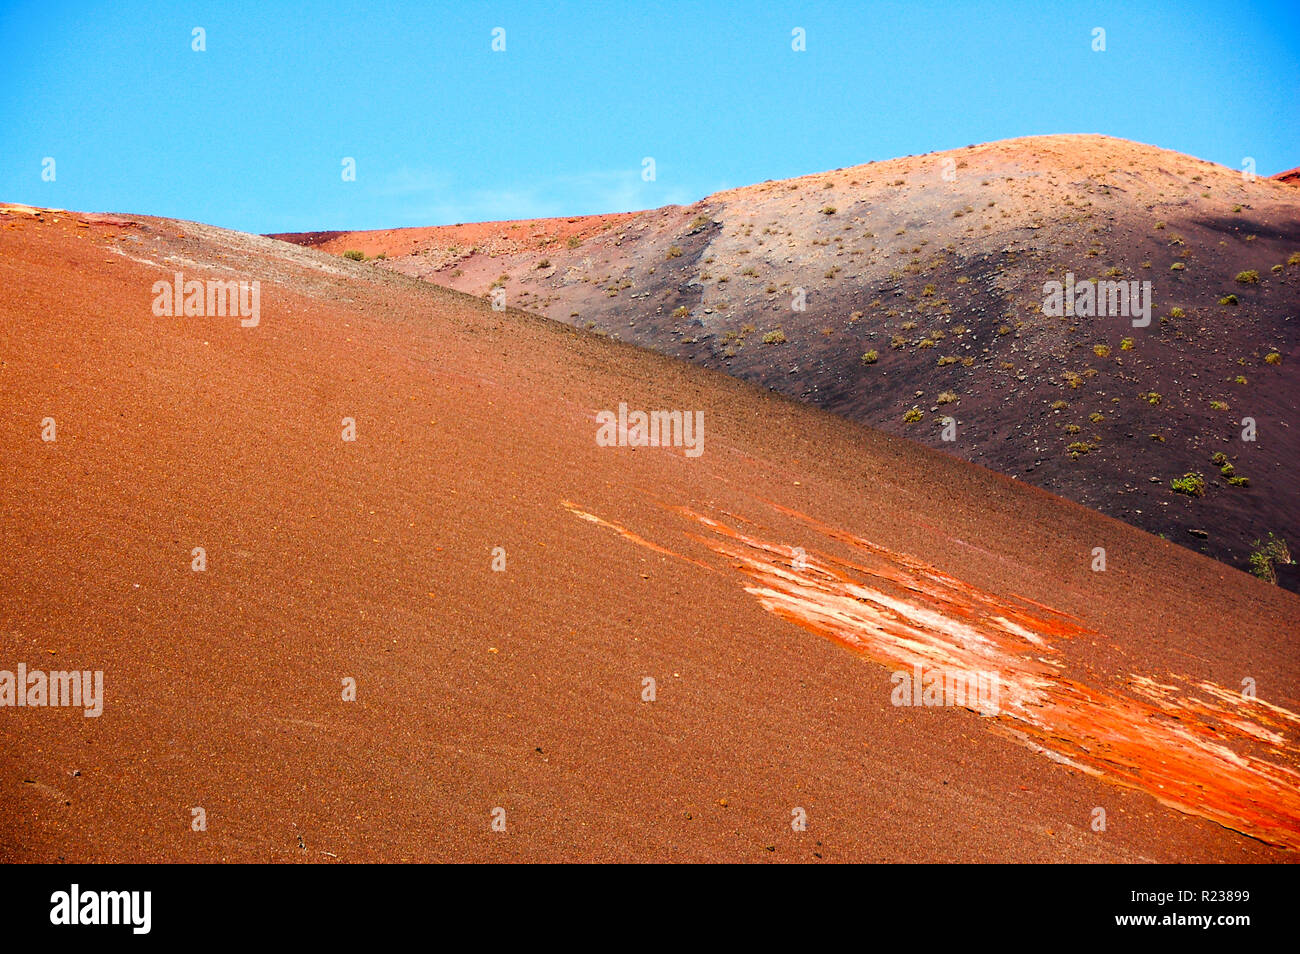 Moonscape, Timanfaya National Park, Lanzarote, Canary Islands, Spain Stock Photo